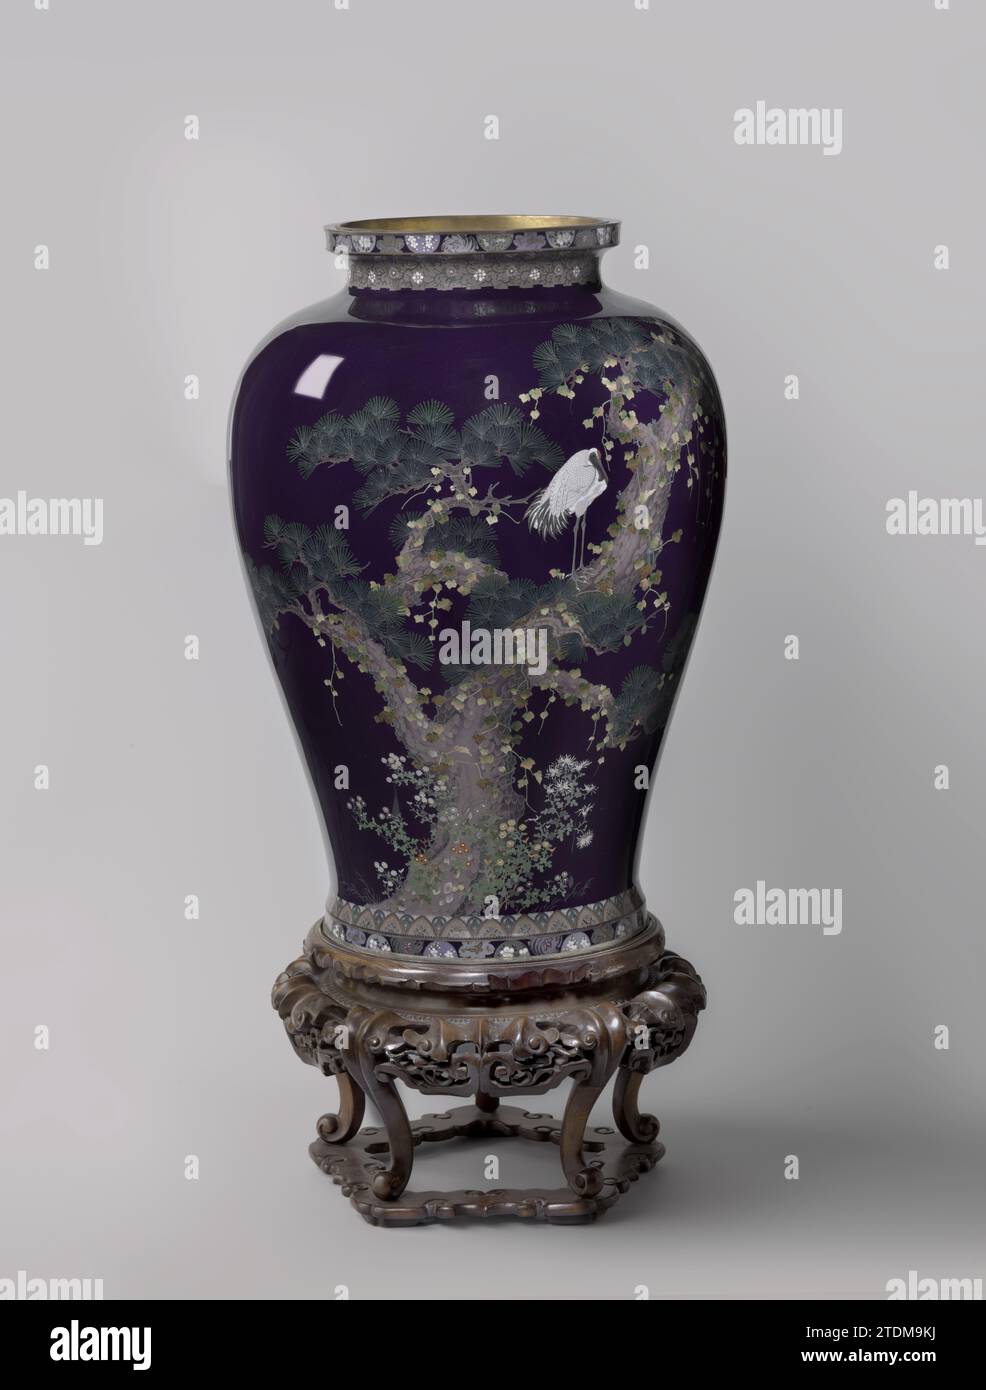 Pedim made of wood, c. 1900 Pedestment made of wood. The pedestal belongs to a vase.  wood (plant material) Pedestment made of wood. The pedestal belongs to a vase.  wood (plant material) Stock Photo